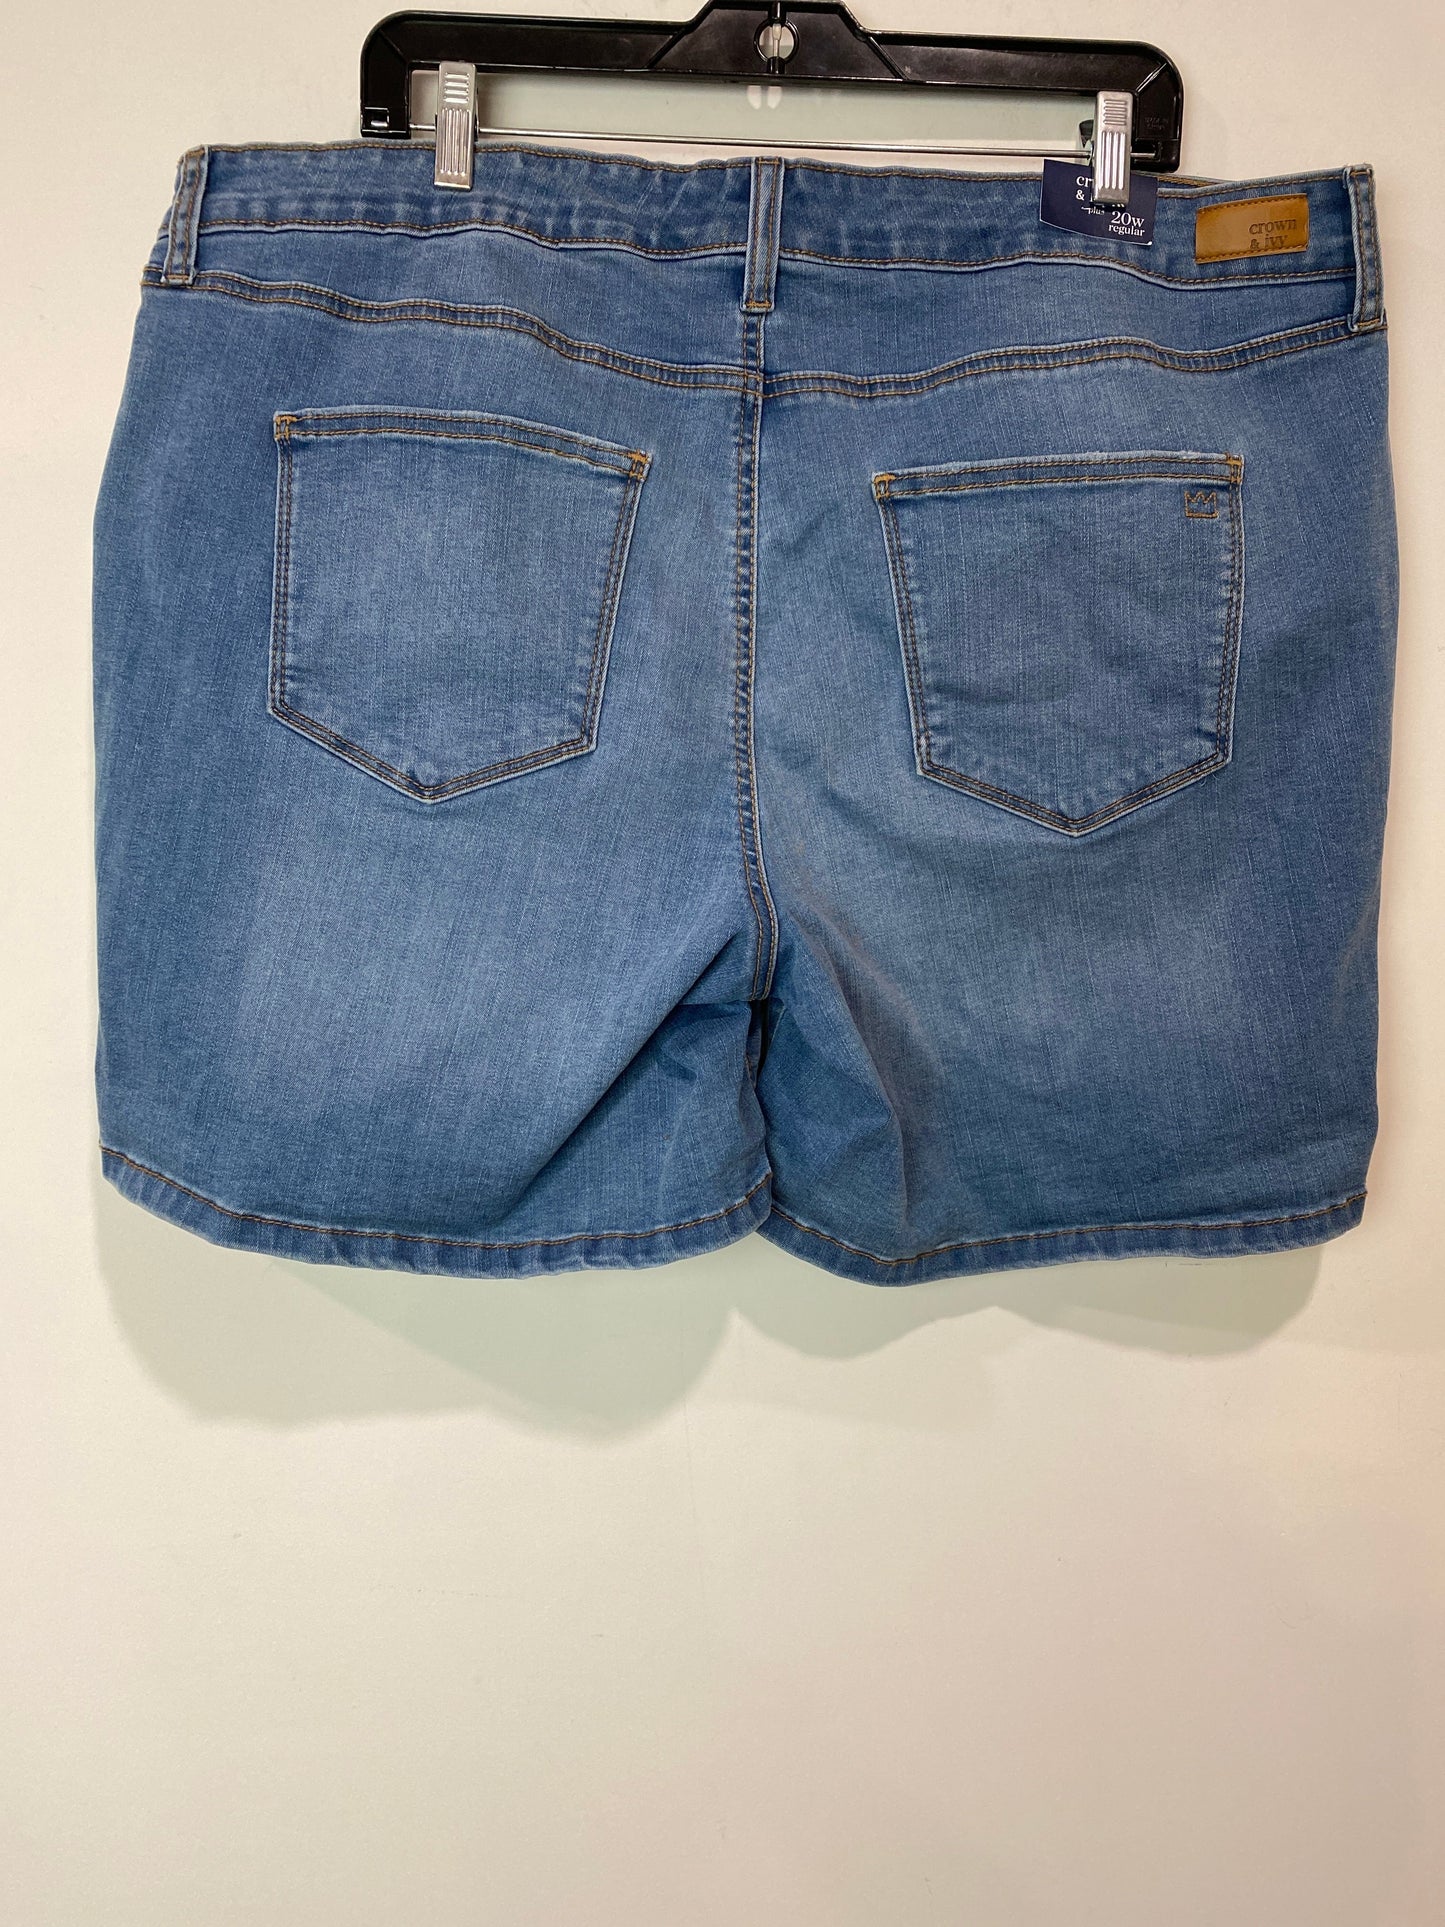 Shorts By Crown And Ivy  Size: 20